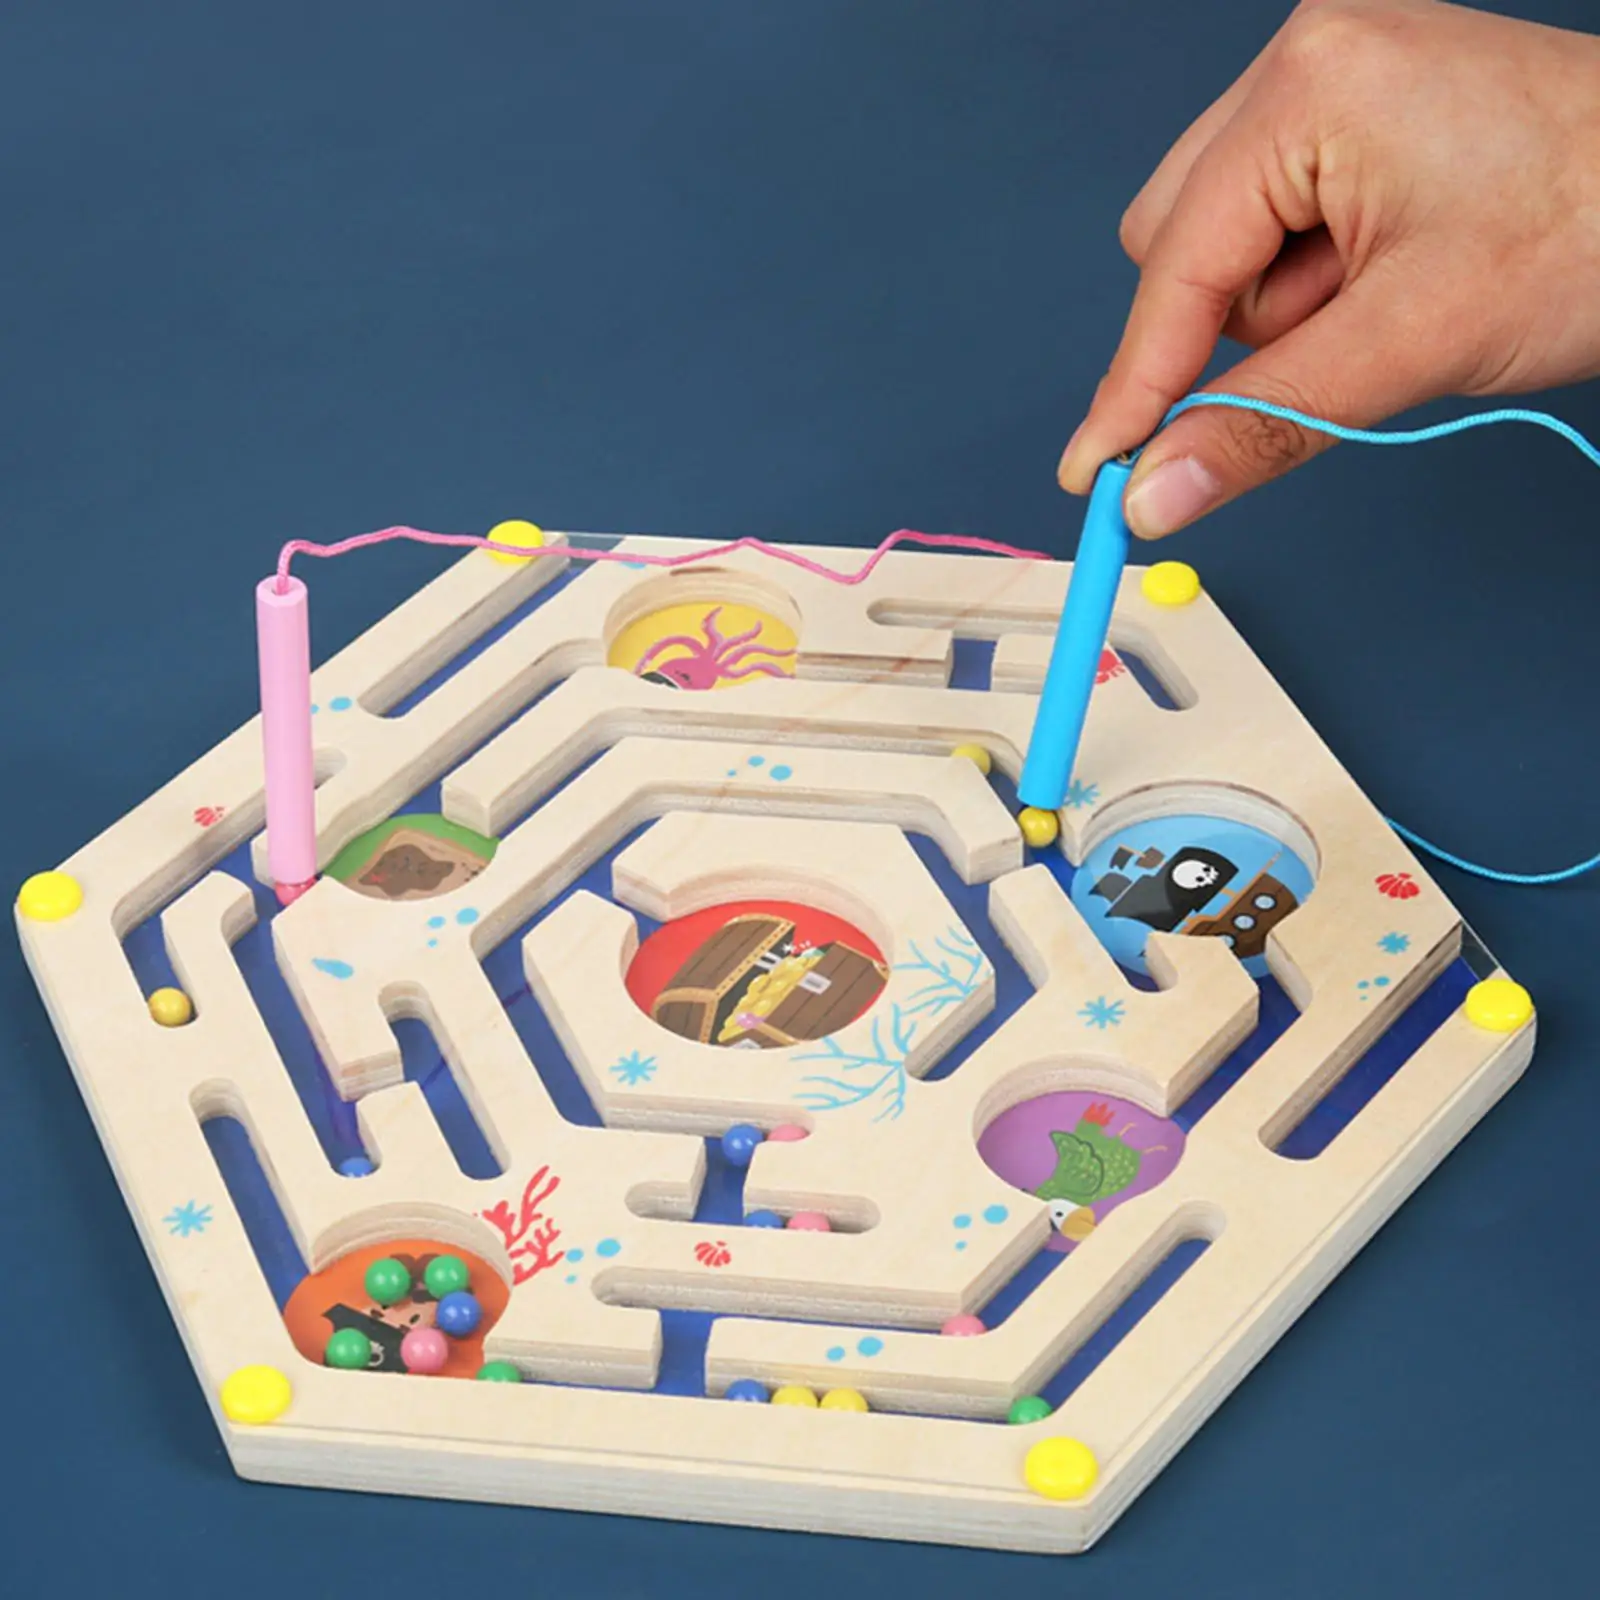 Magnetic Maze Puzzle Game Board Games Preschool Educational Activity Toys